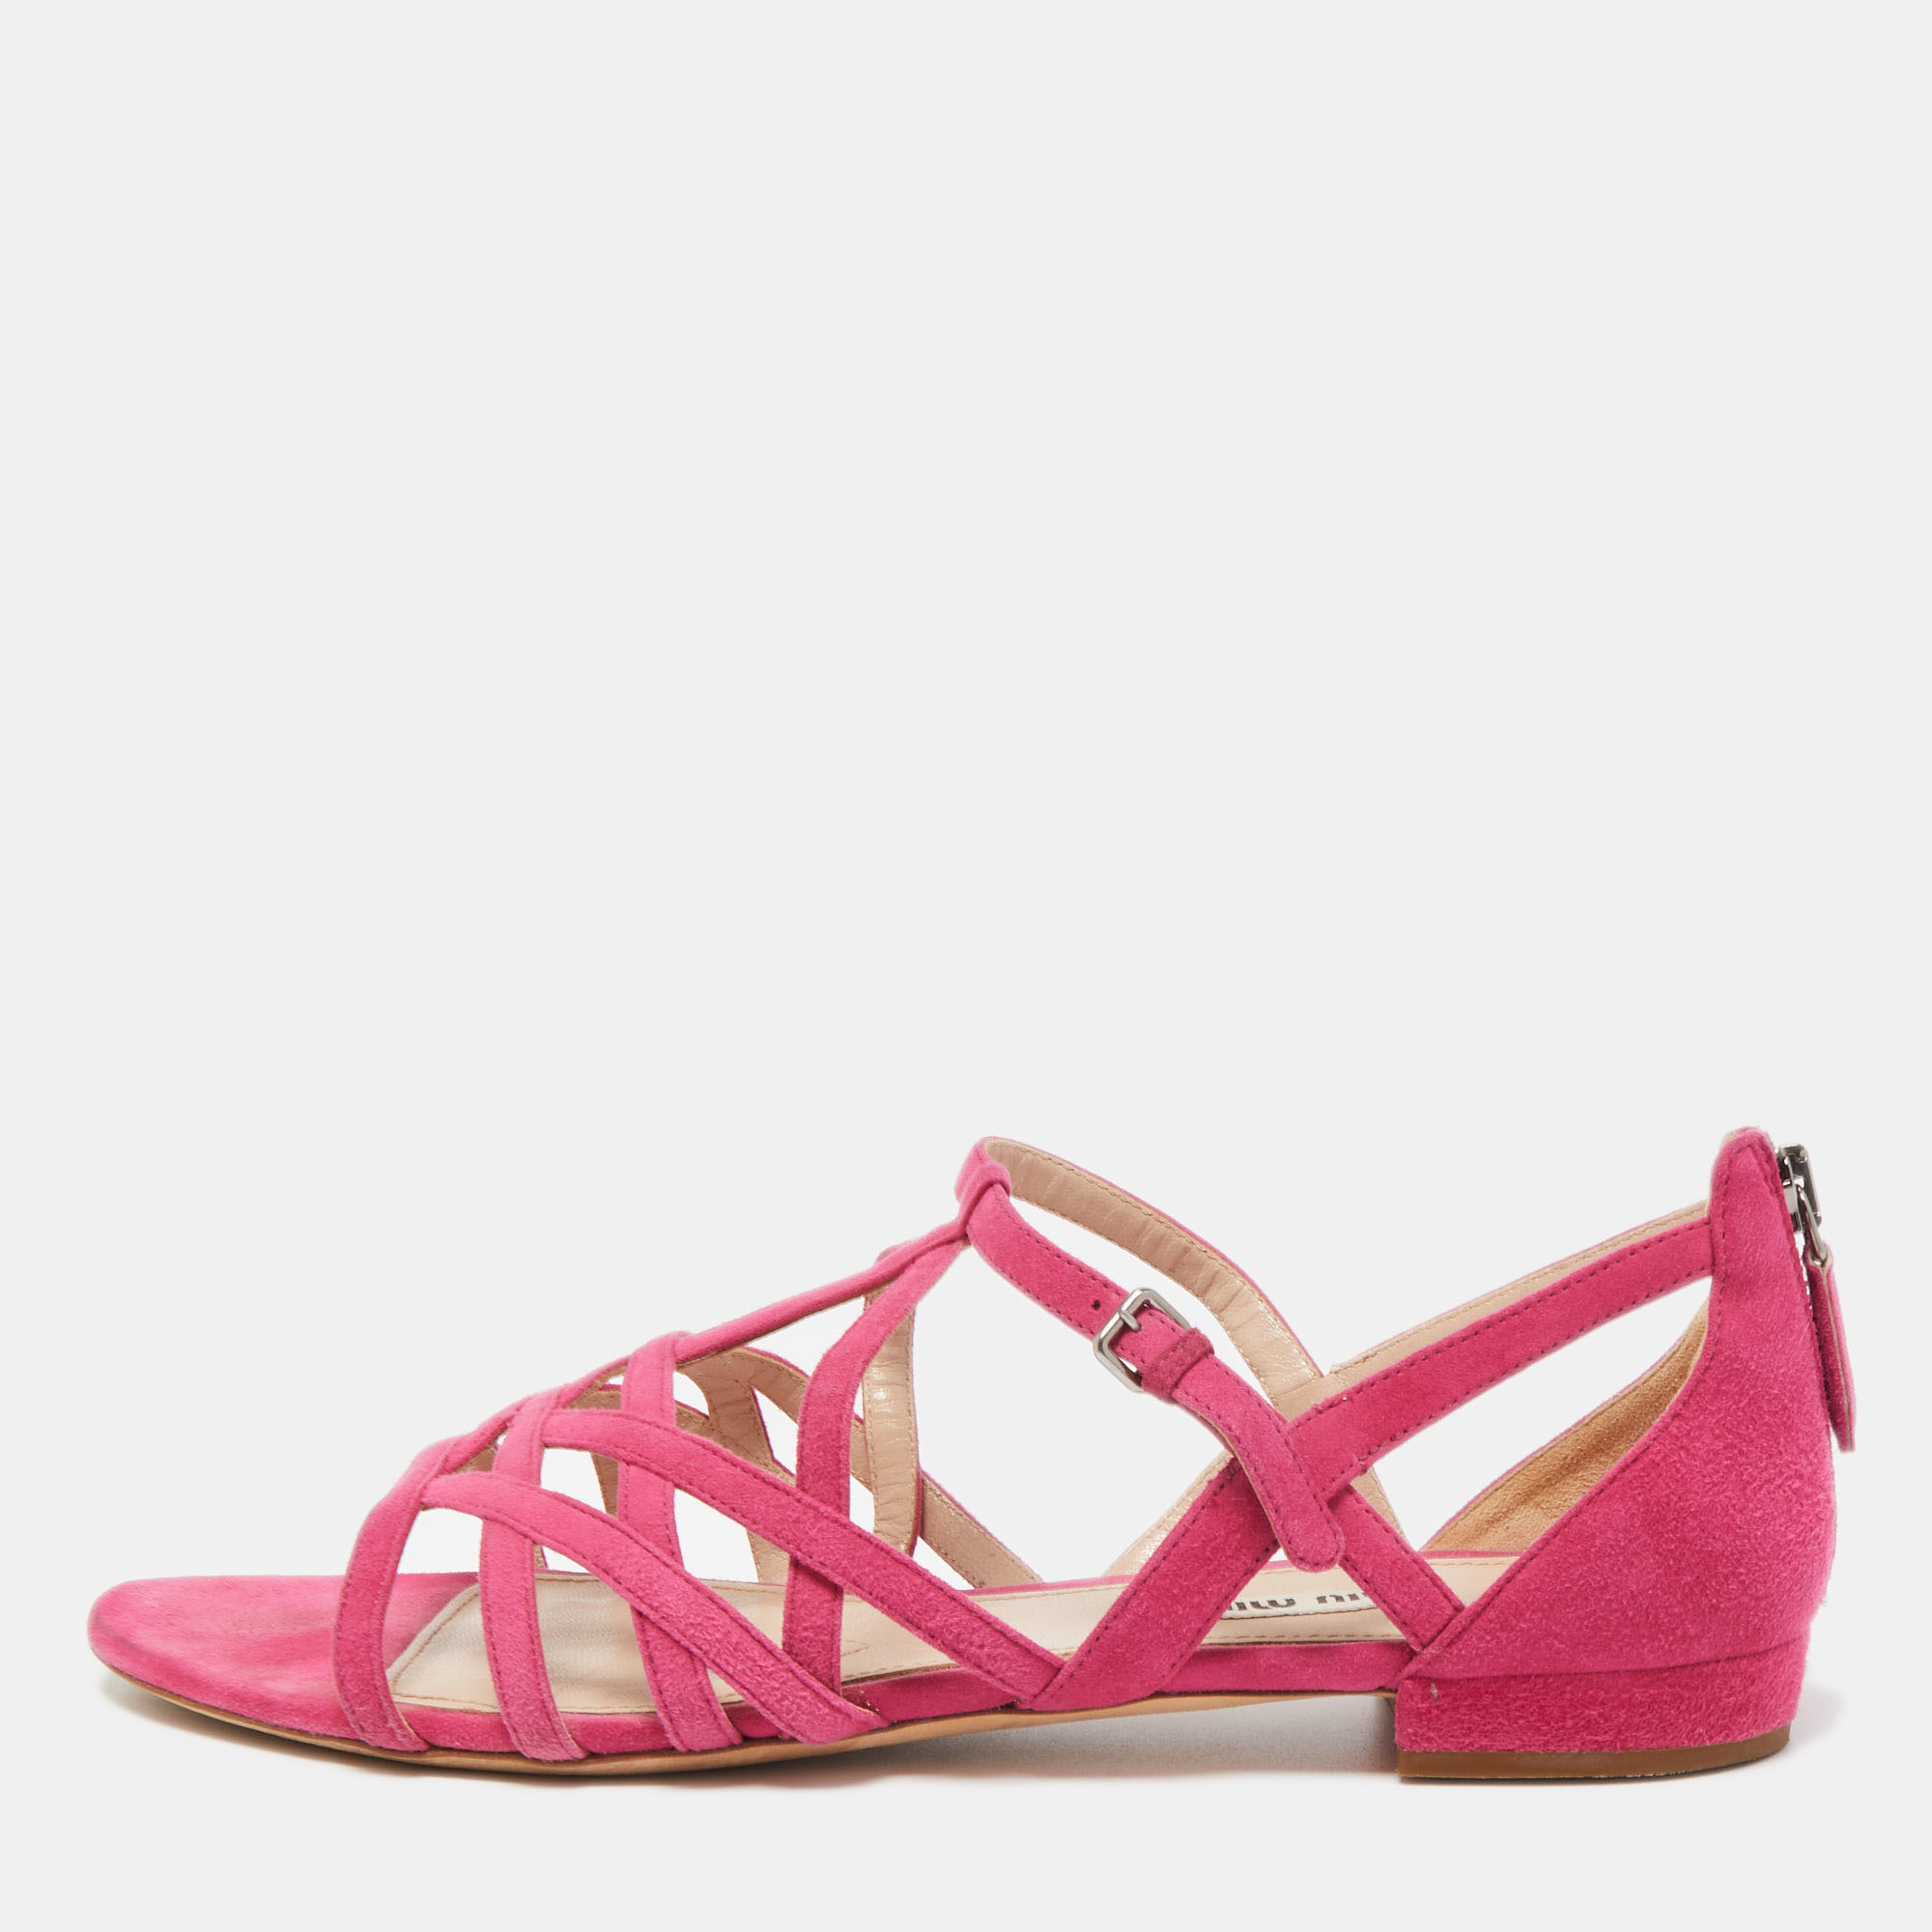 Pre-owned Miu Miu Pink Suede Strappy Flat Sandals Size 39.5